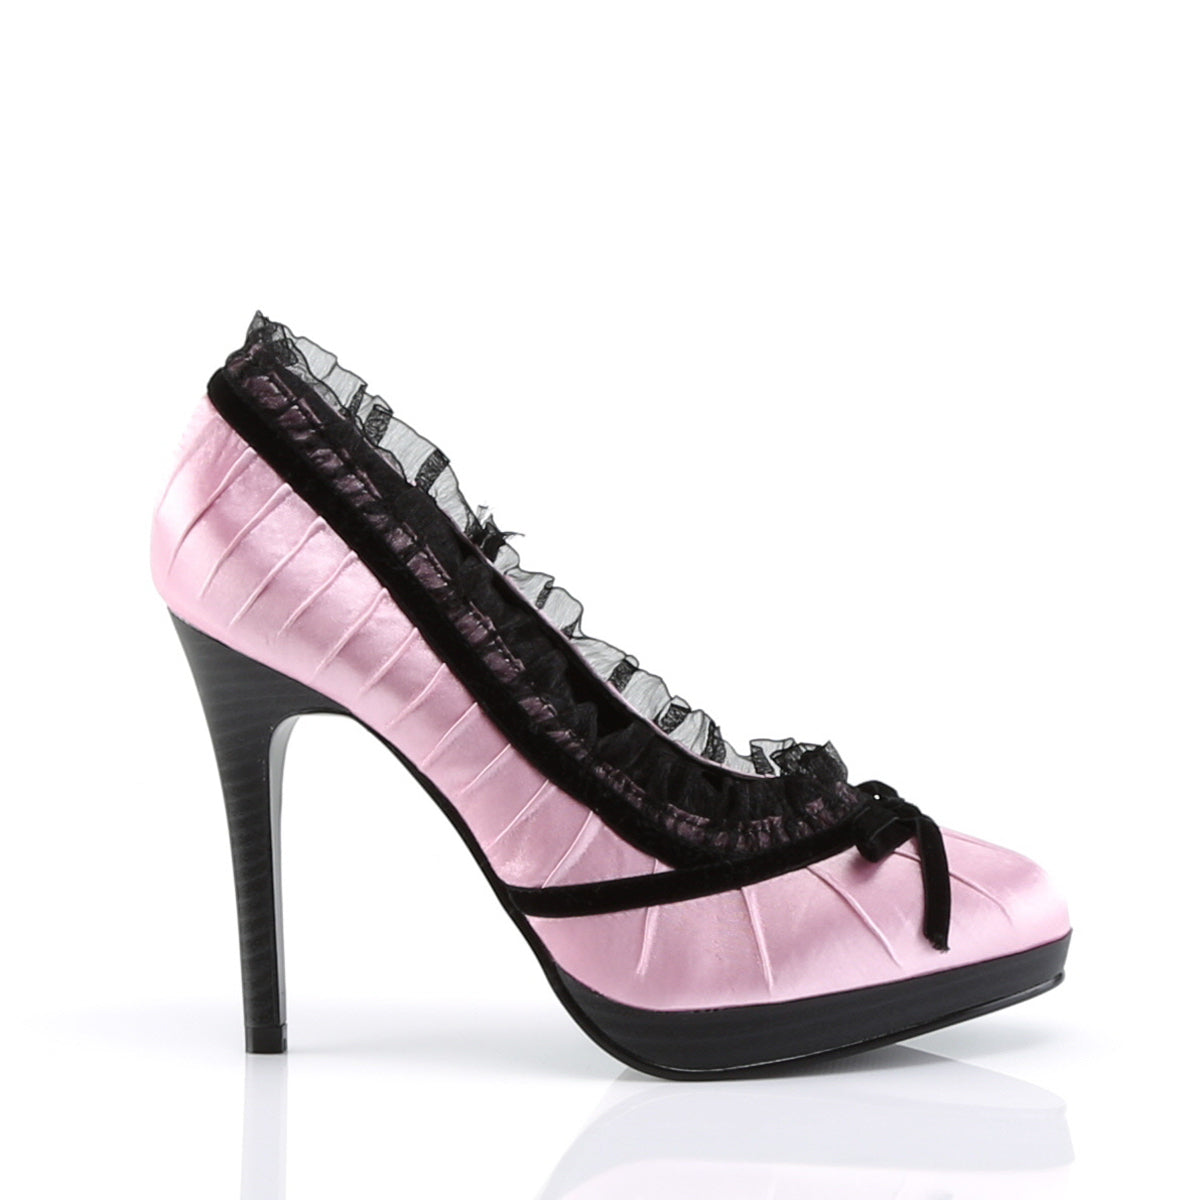 Pin Up Couture Pompe da donna BLISS-38 Pink-Blk Satin